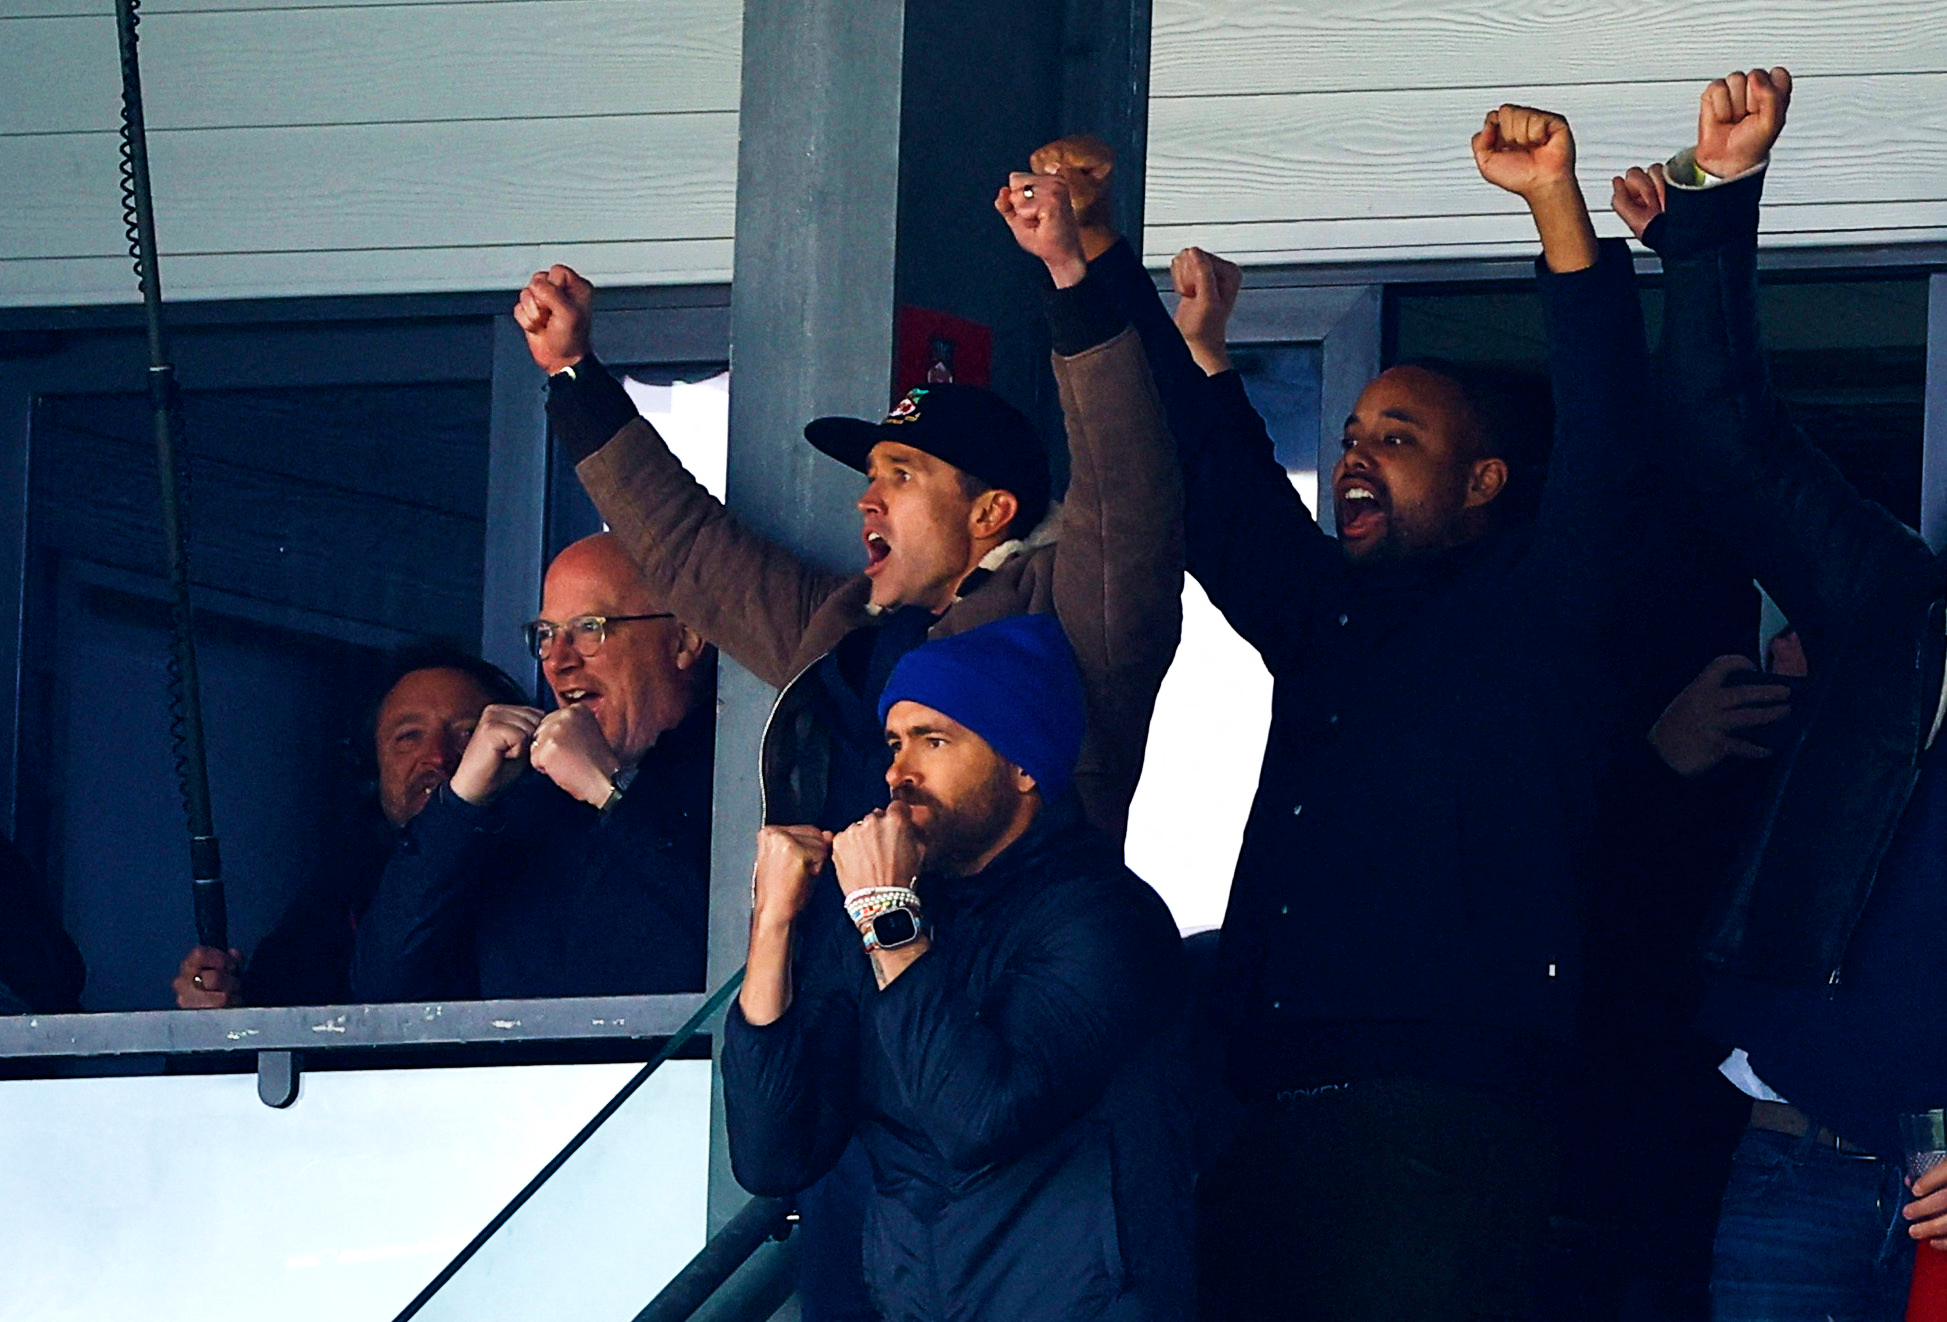 Ryan Reynolds, front, and co-owner Rob McElhenney celebrate Wrexham’s victory